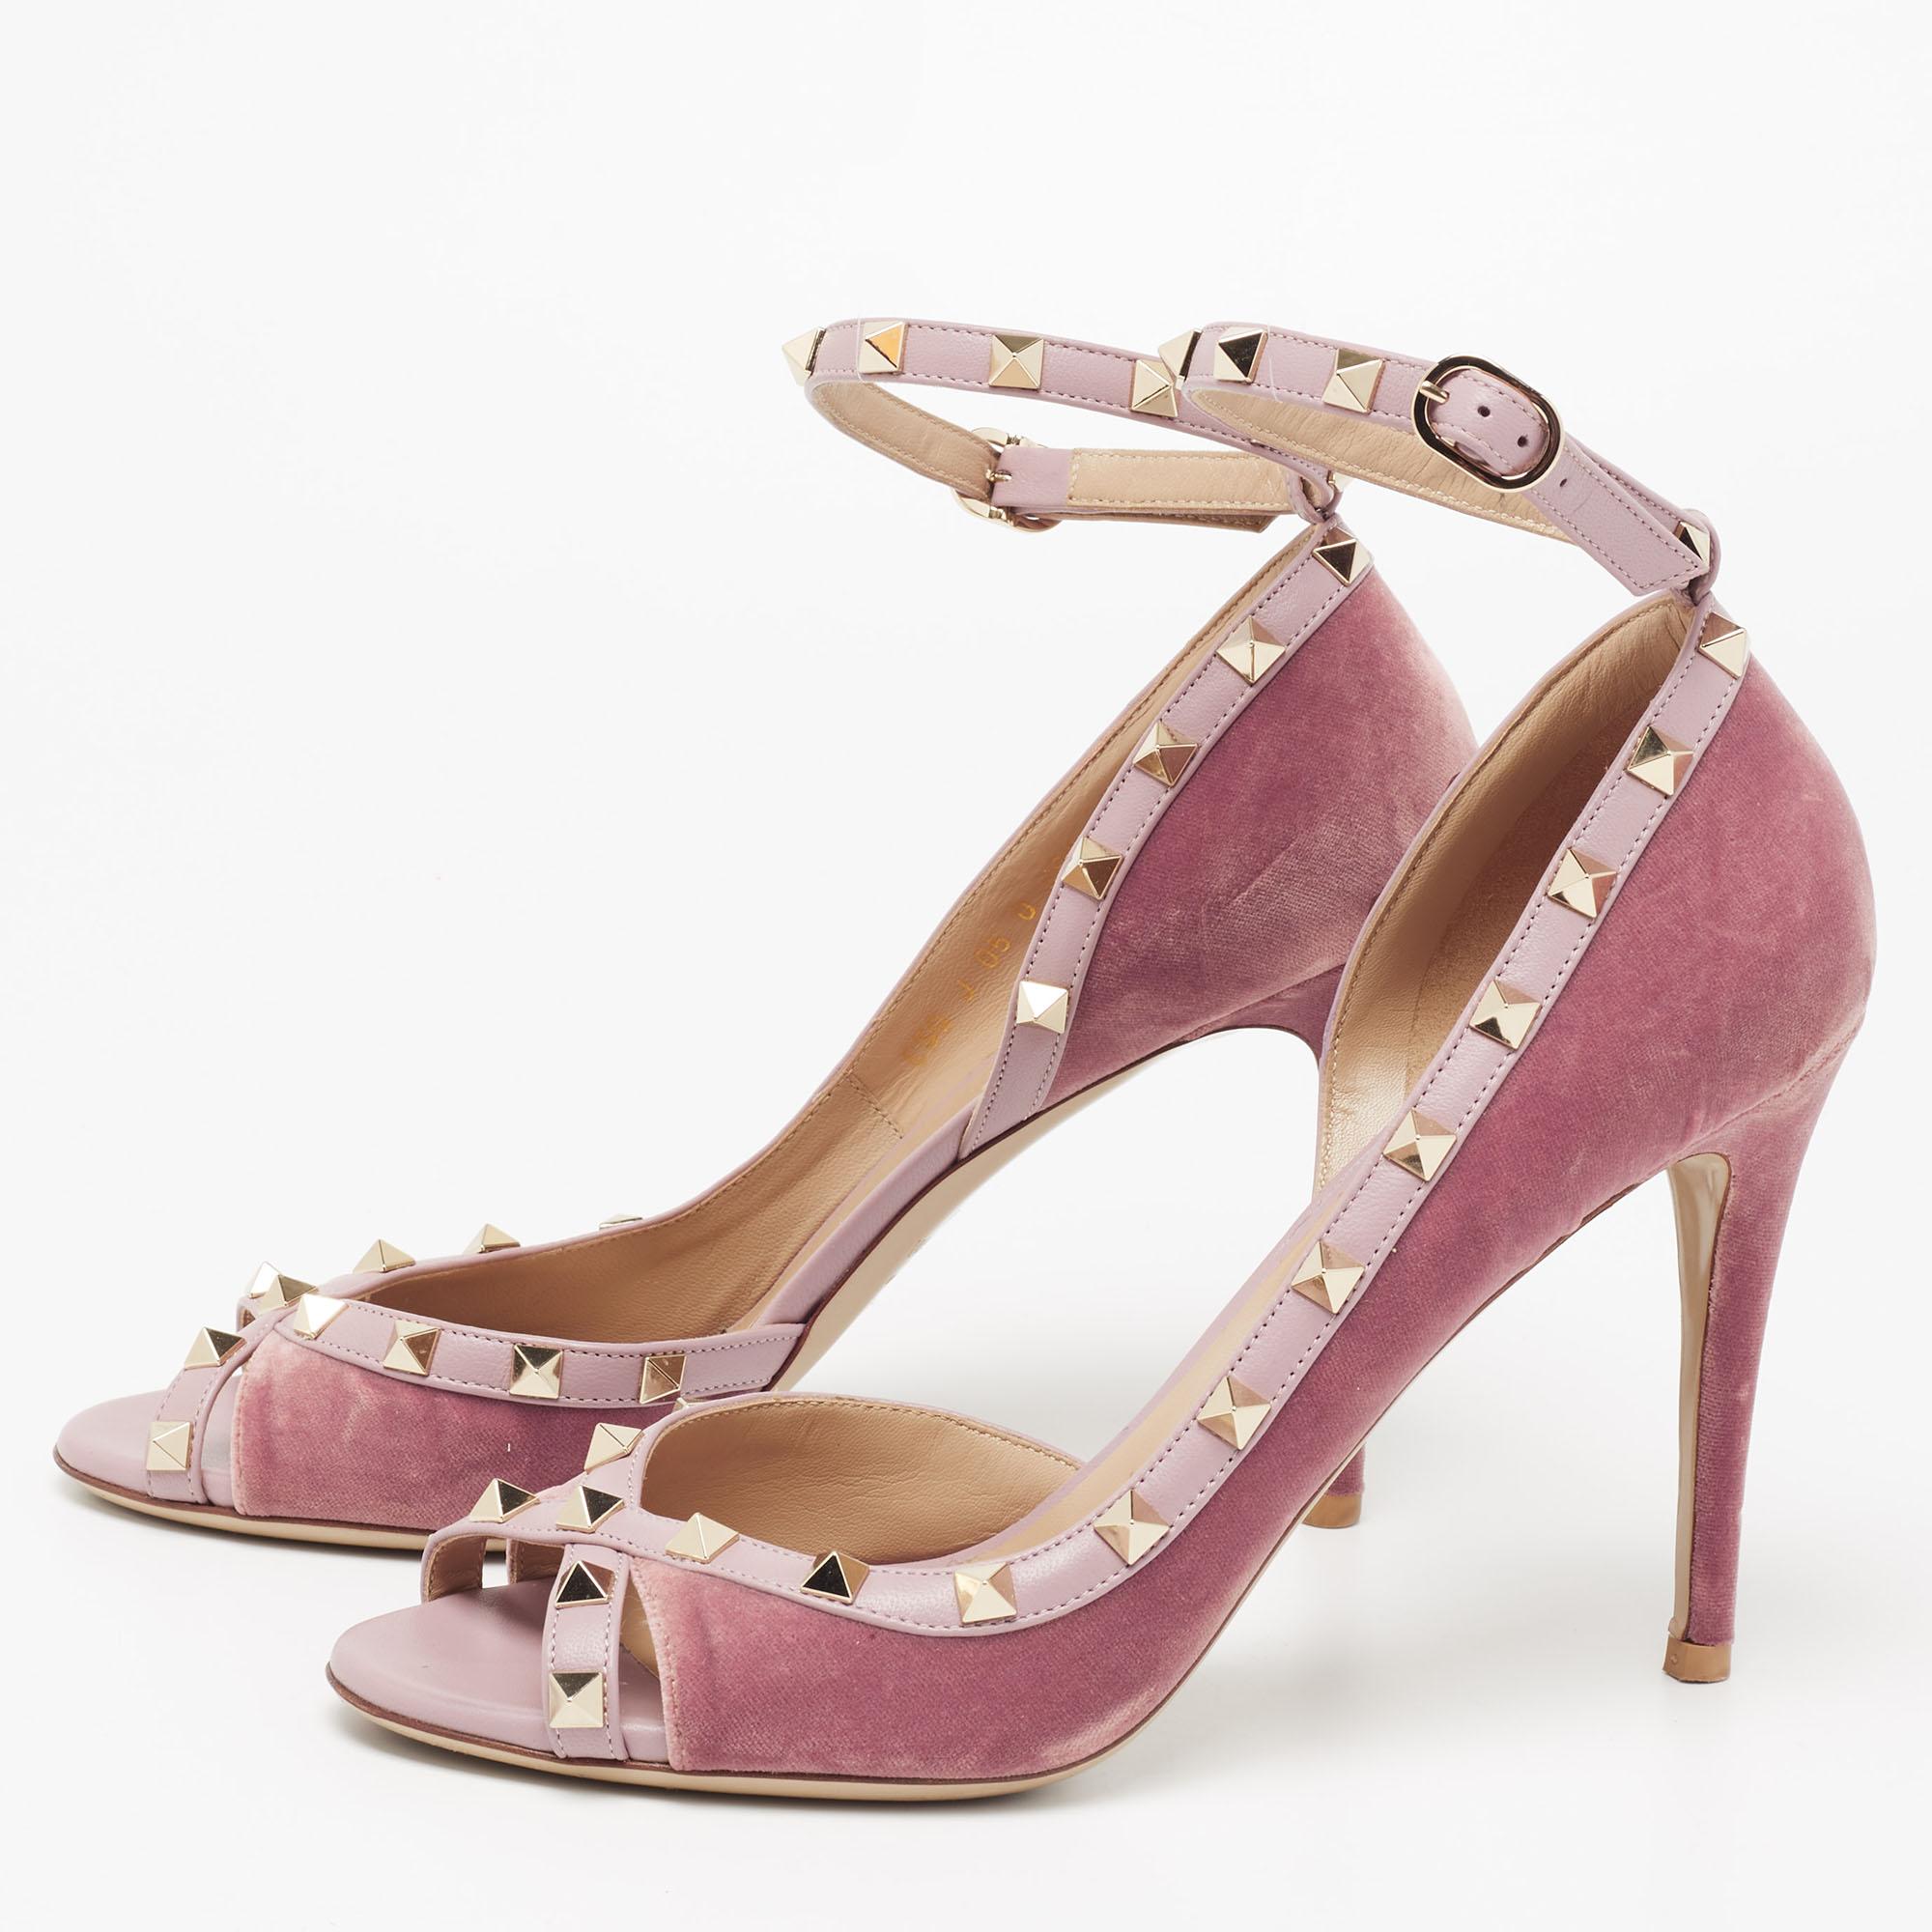 Pink pumps like these ones are on every girl's wishlist! Well, look no further. Valentino brings you these pumps that are created from two-tone velvet and leather, enriched with Rockstud accents, and provided with a buckled ankle strap. Gold-tone